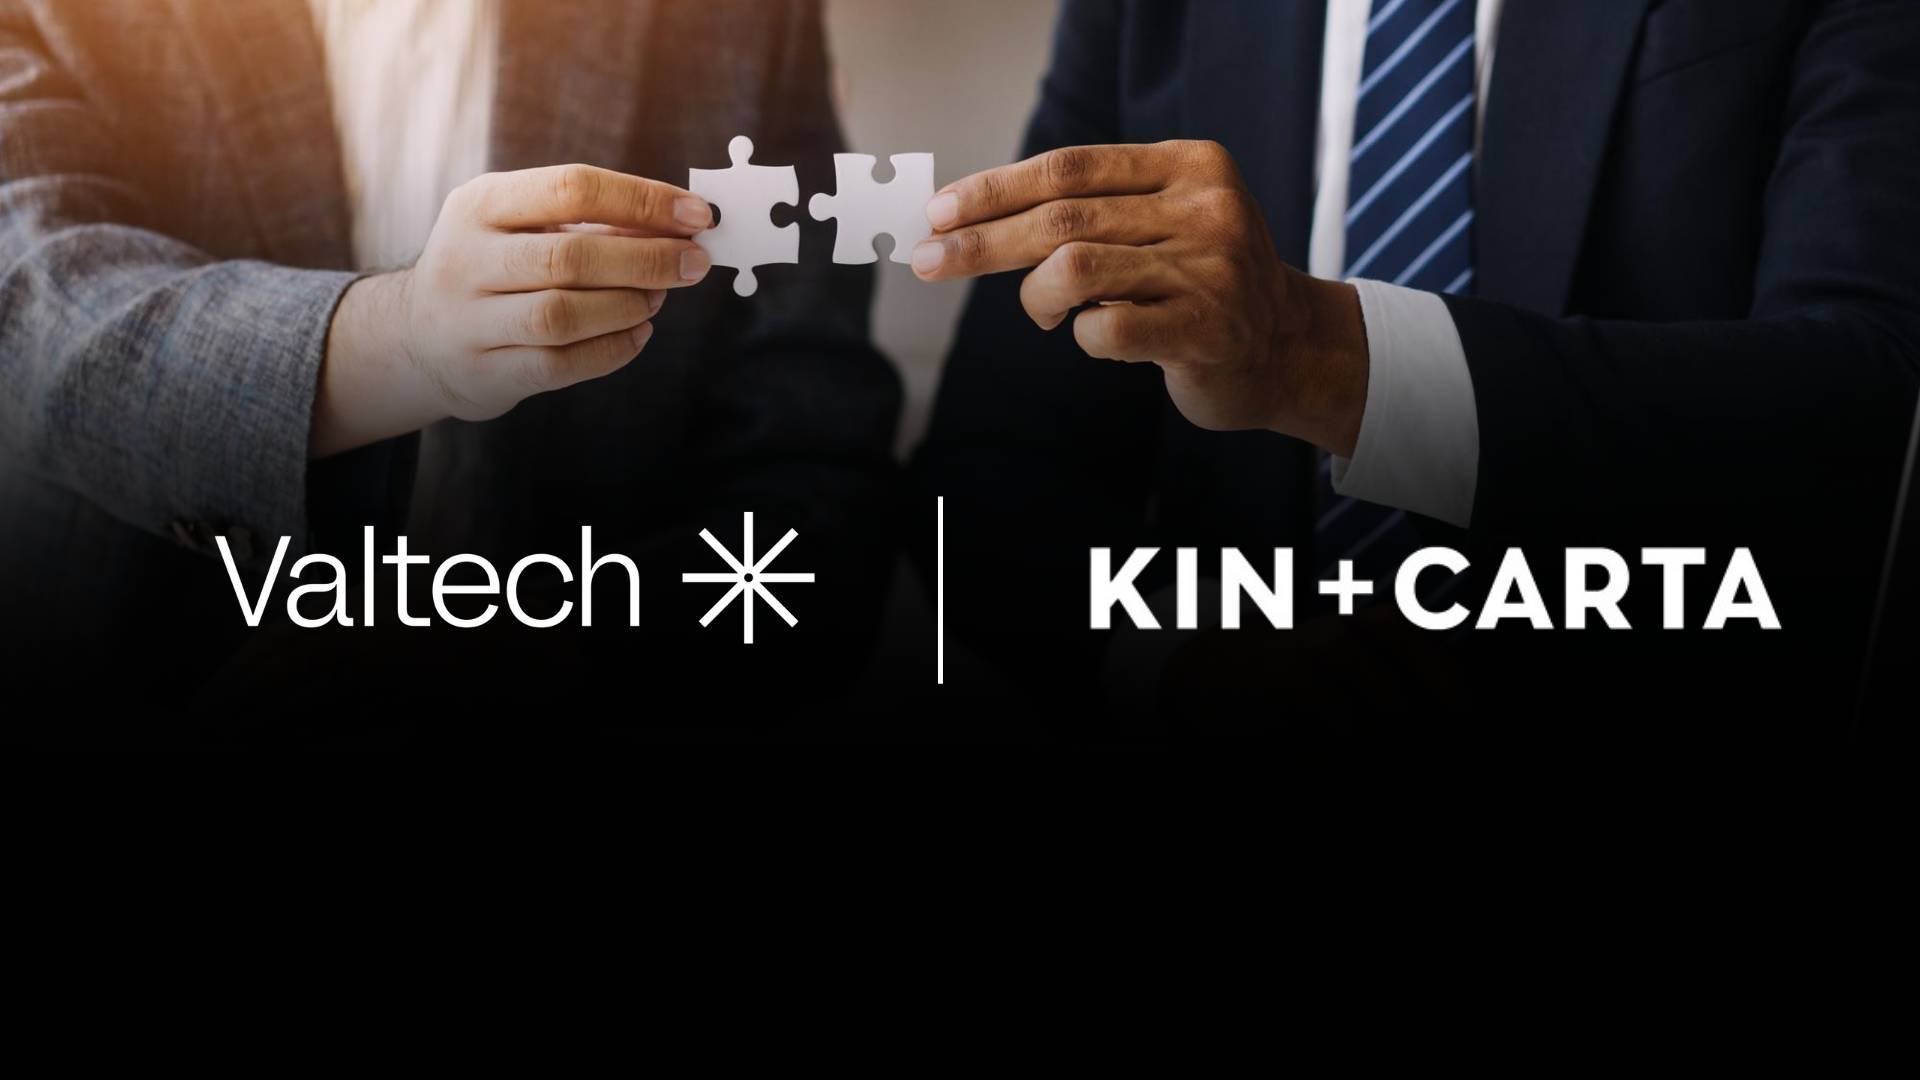 Valtech Completes Acquisition of Kin + Carta: Pioneering Experience Innovation